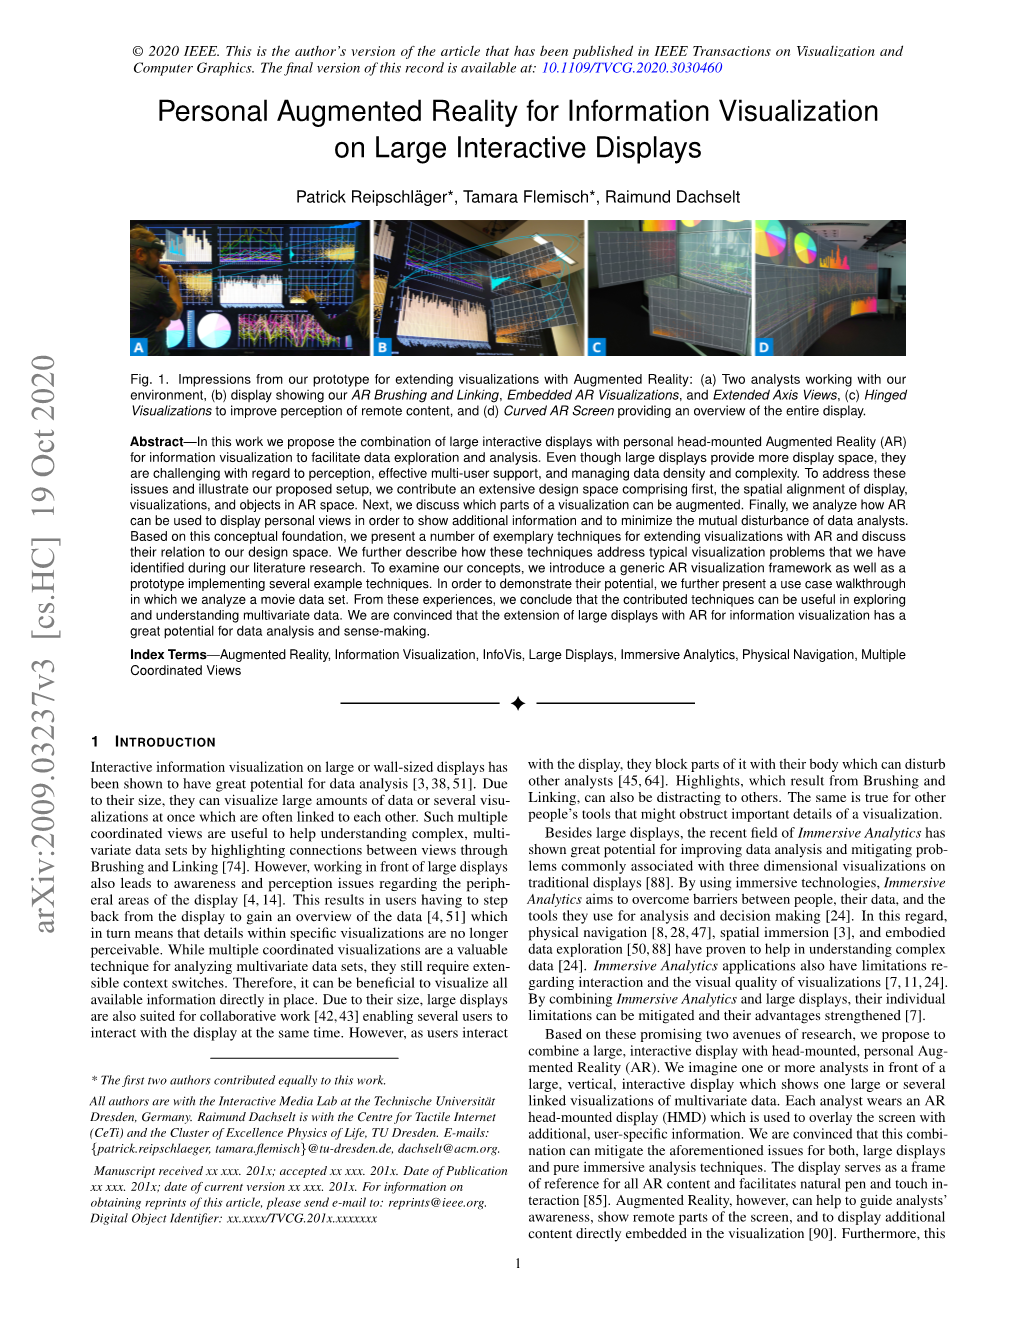 Personal Augmented Reality for Information Visualization on Large Interactive Displays